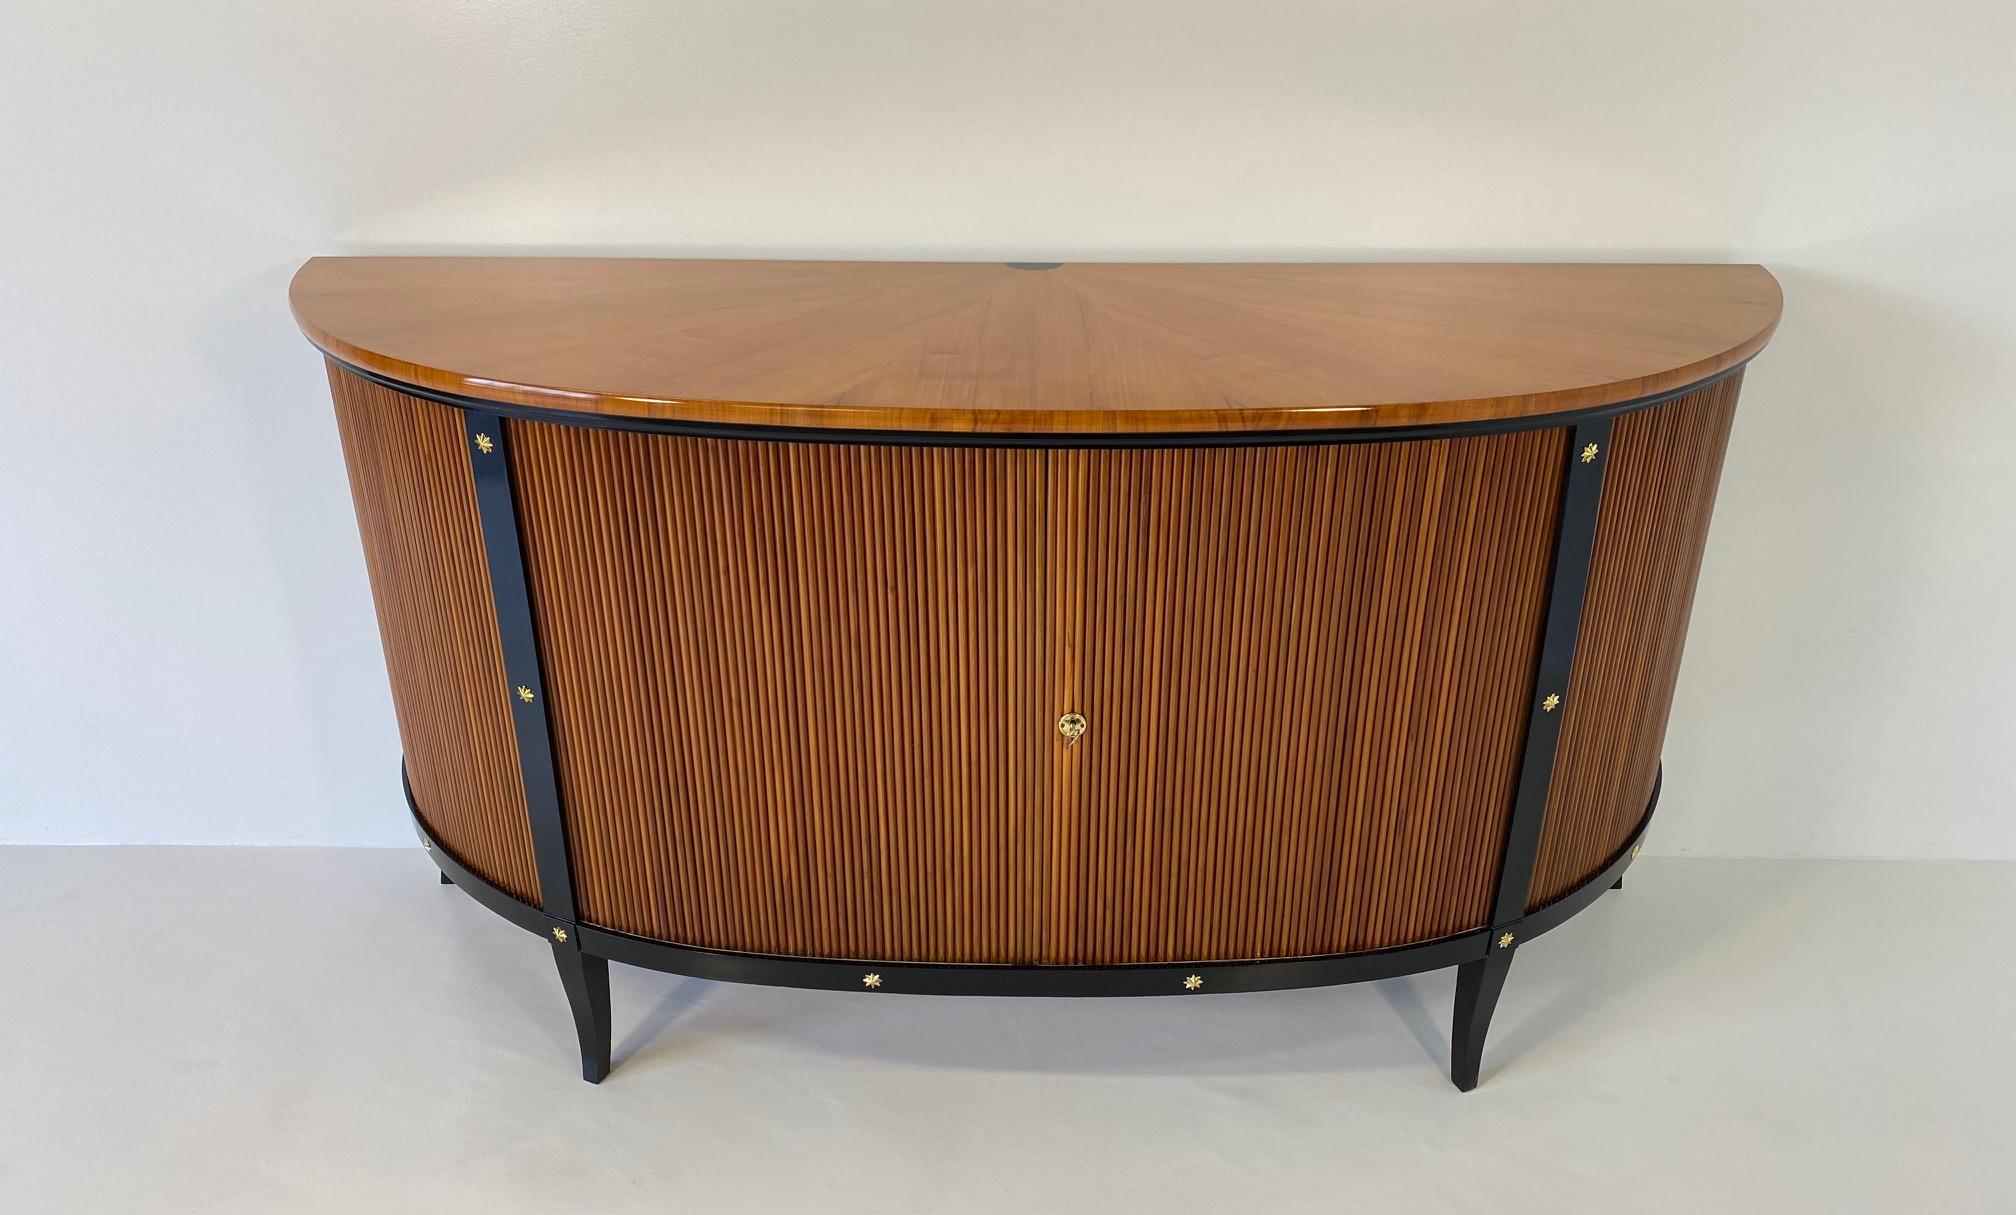 This Art Deco style sideboard was produced in the late 1950s in Italy. It is entirely made of cherry wood and has black lacquer profiles and decorations.
The sideboard features sliding doors that gets hidden inside the sideboard once opened. 
The